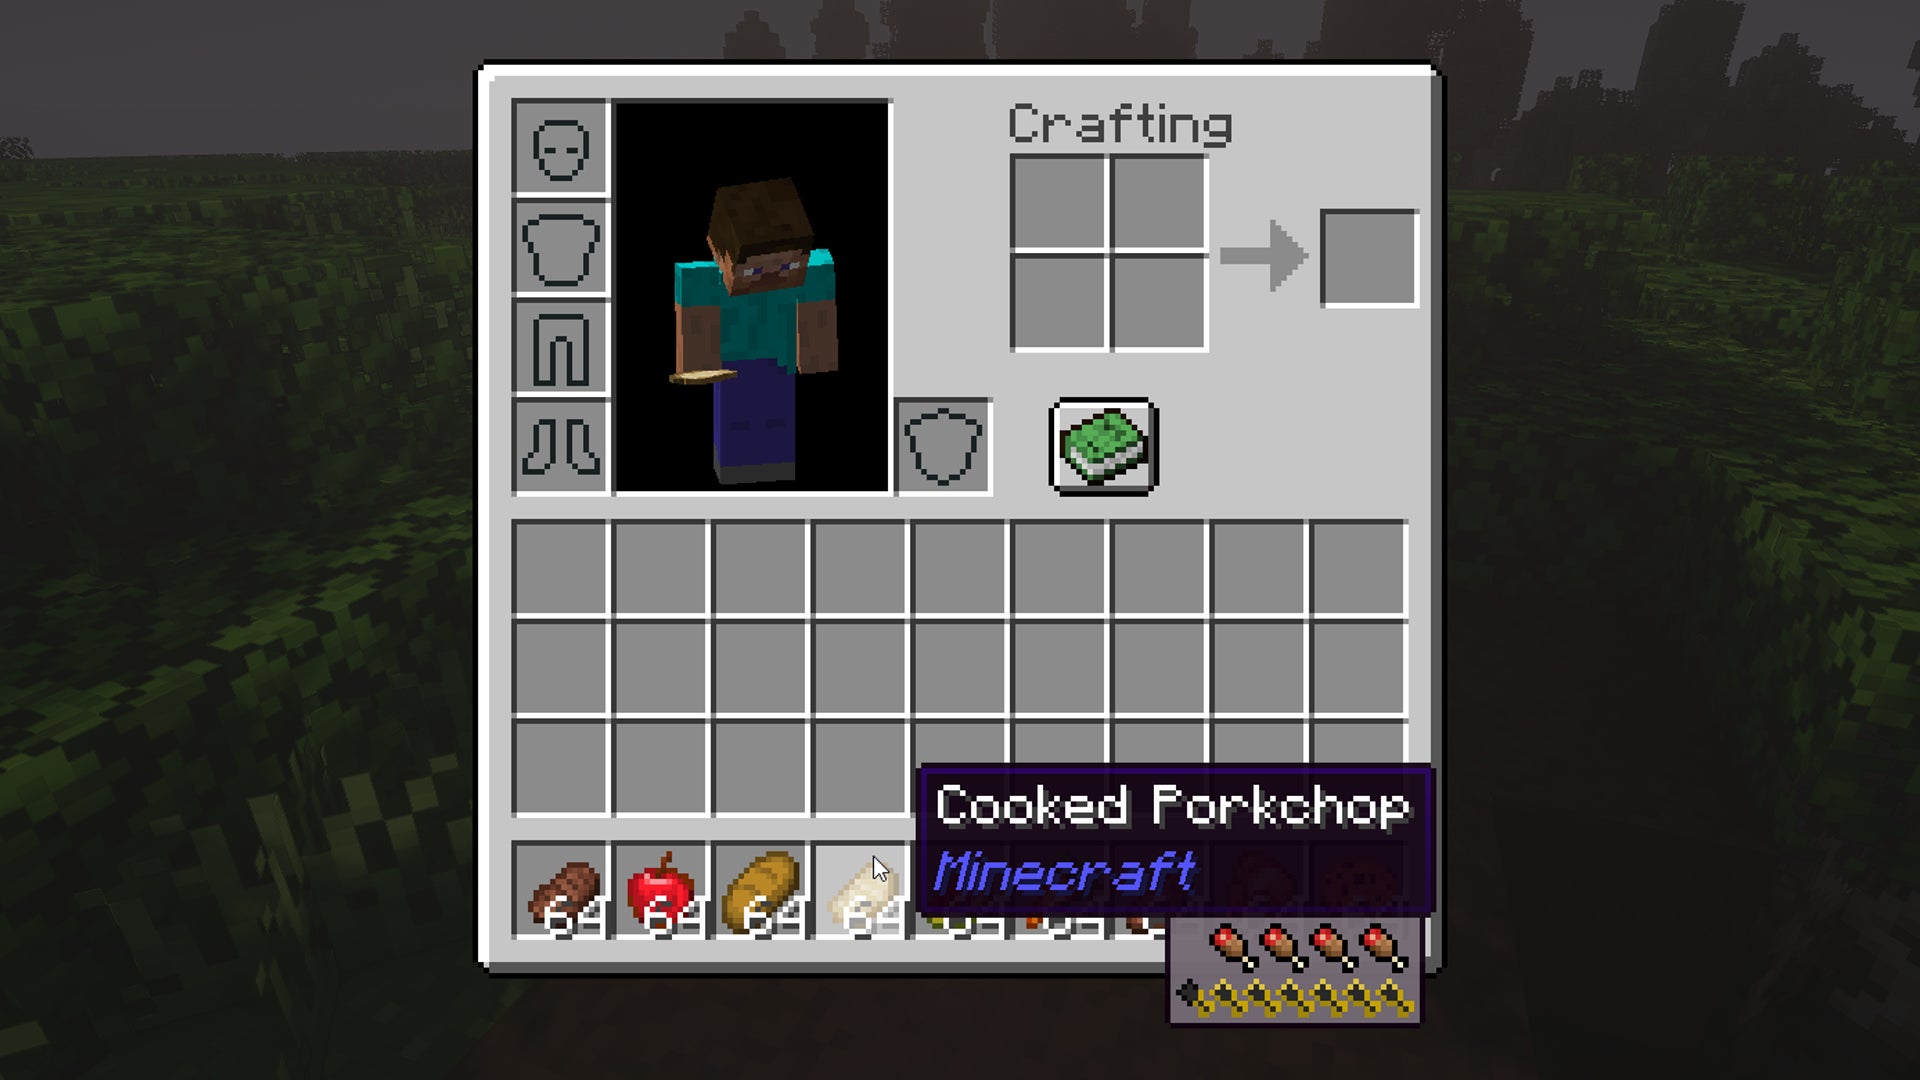 A Minecraft screenshot of the inventory window with the Appleskin mod displaying details about a Cooked Porkchop item.